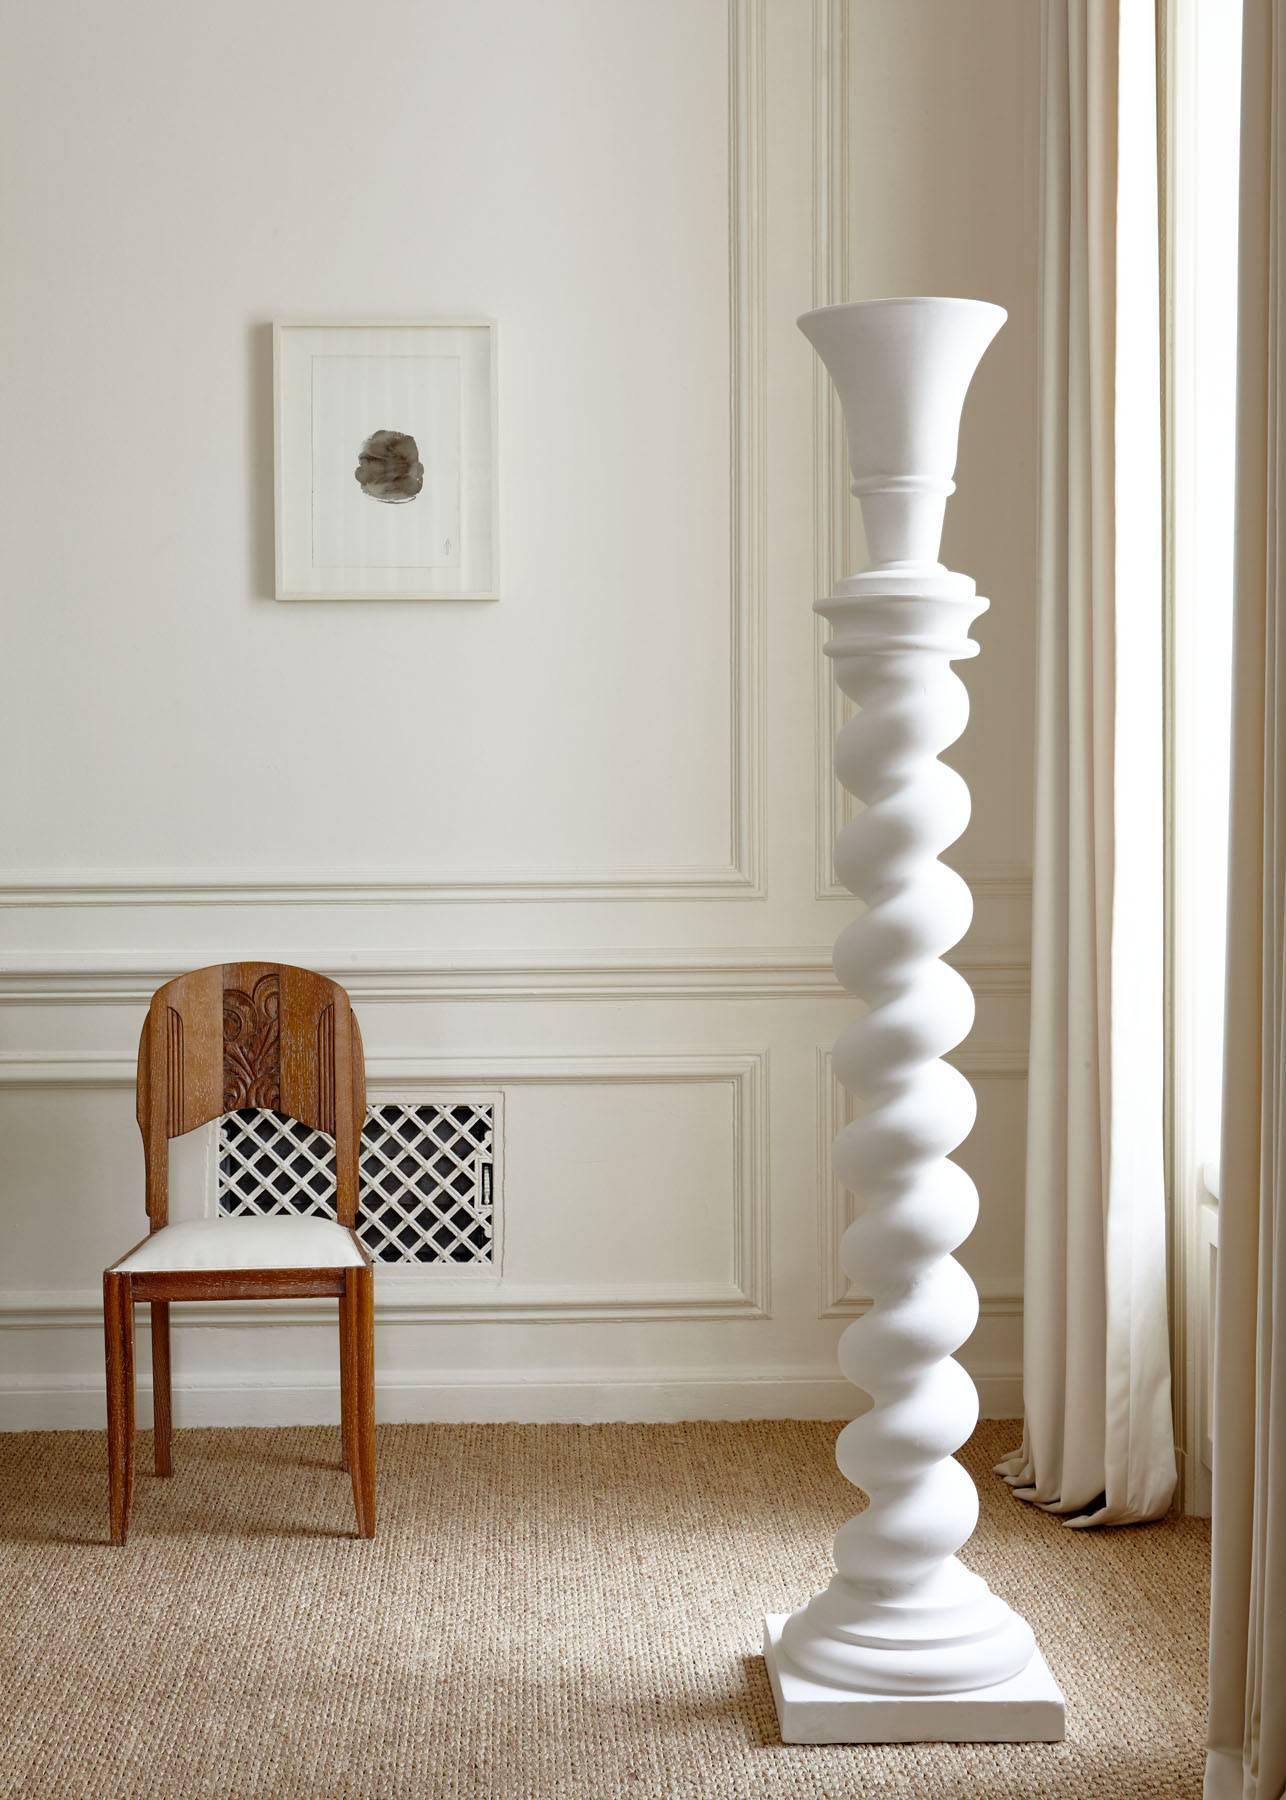 2 plaster standing lamps by Jean-Charles Moreux in a modern neo- Baroque spirit with an Amphora/urn resting on twist form columns. Moreux was a master of the neo-Baroque and surrealism in interior design with his stunning interiors that utilized